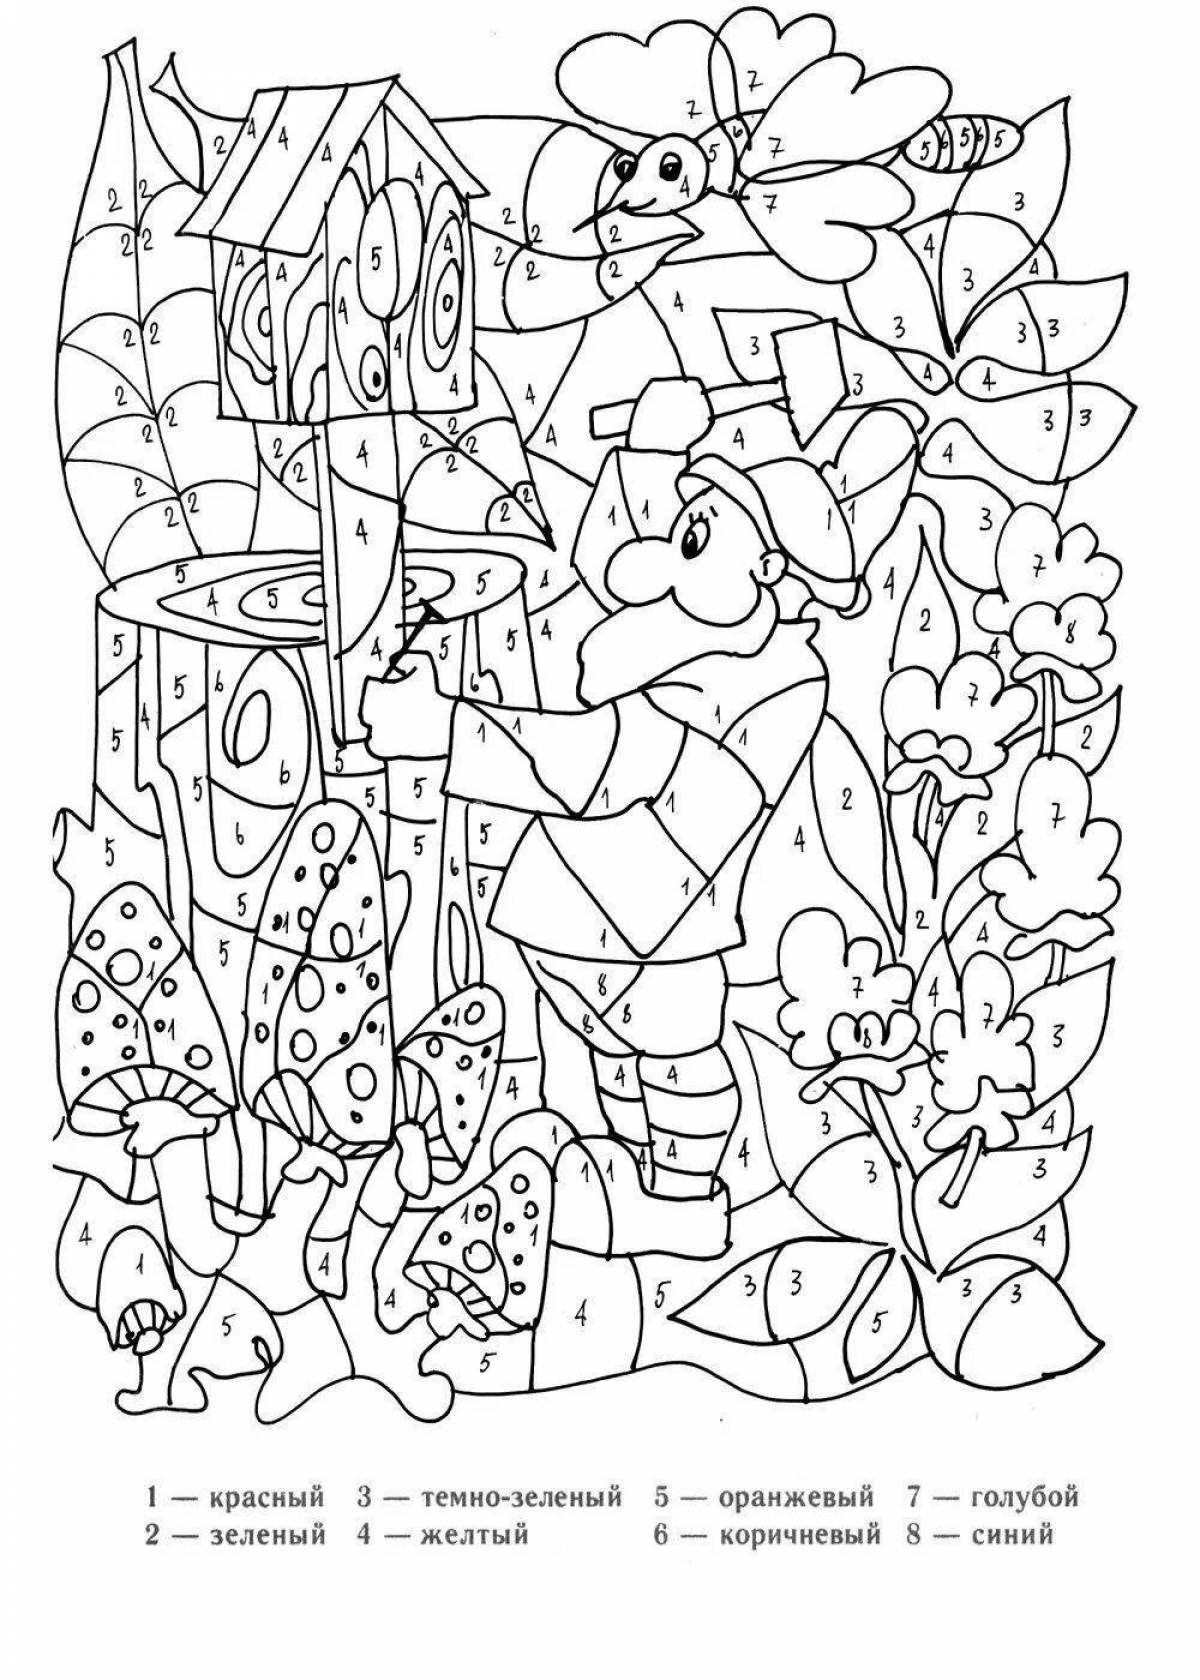 Vibrant spell coloring page for 7-8 year olds